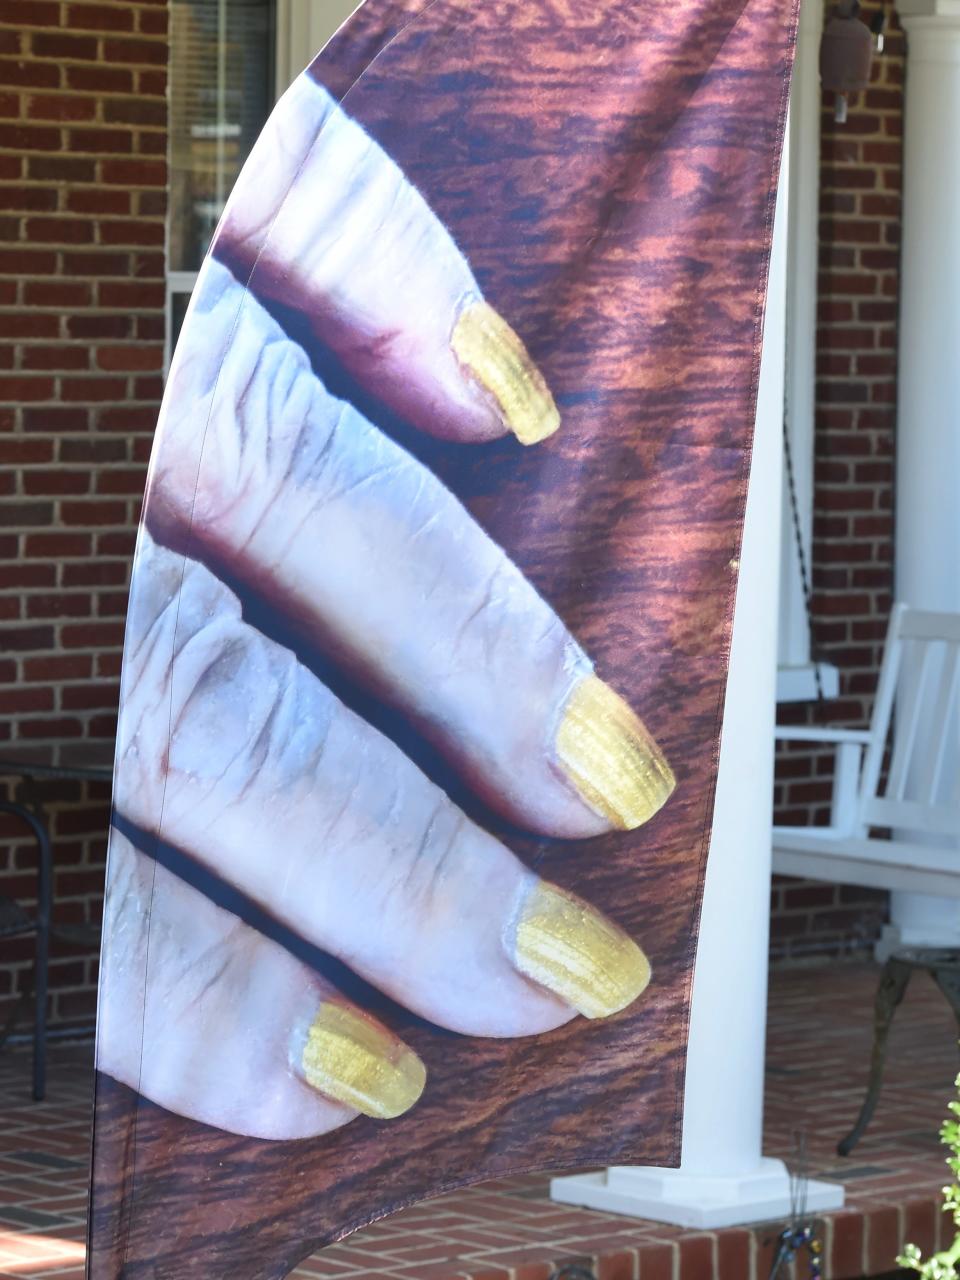 Hsini Des's "My Mother's Fingers" is on display at 124 Thornrose Avenue as part of Staunton Outside Arts' 2023 Terrain Biennial.